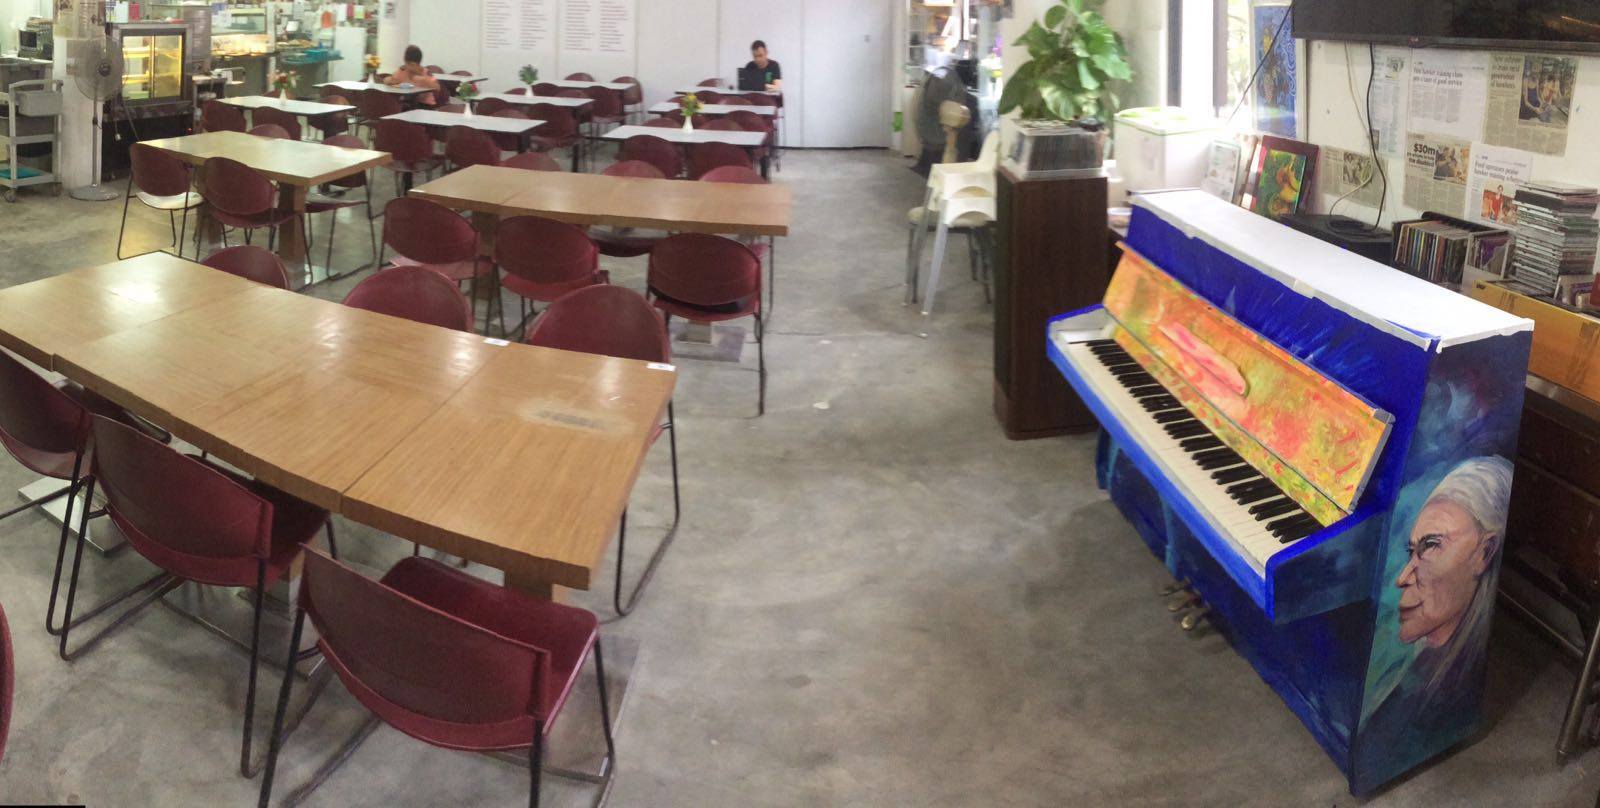 Dignity Kitchen gets a piano through its partnership with Play Me, I’m Yours Singapore